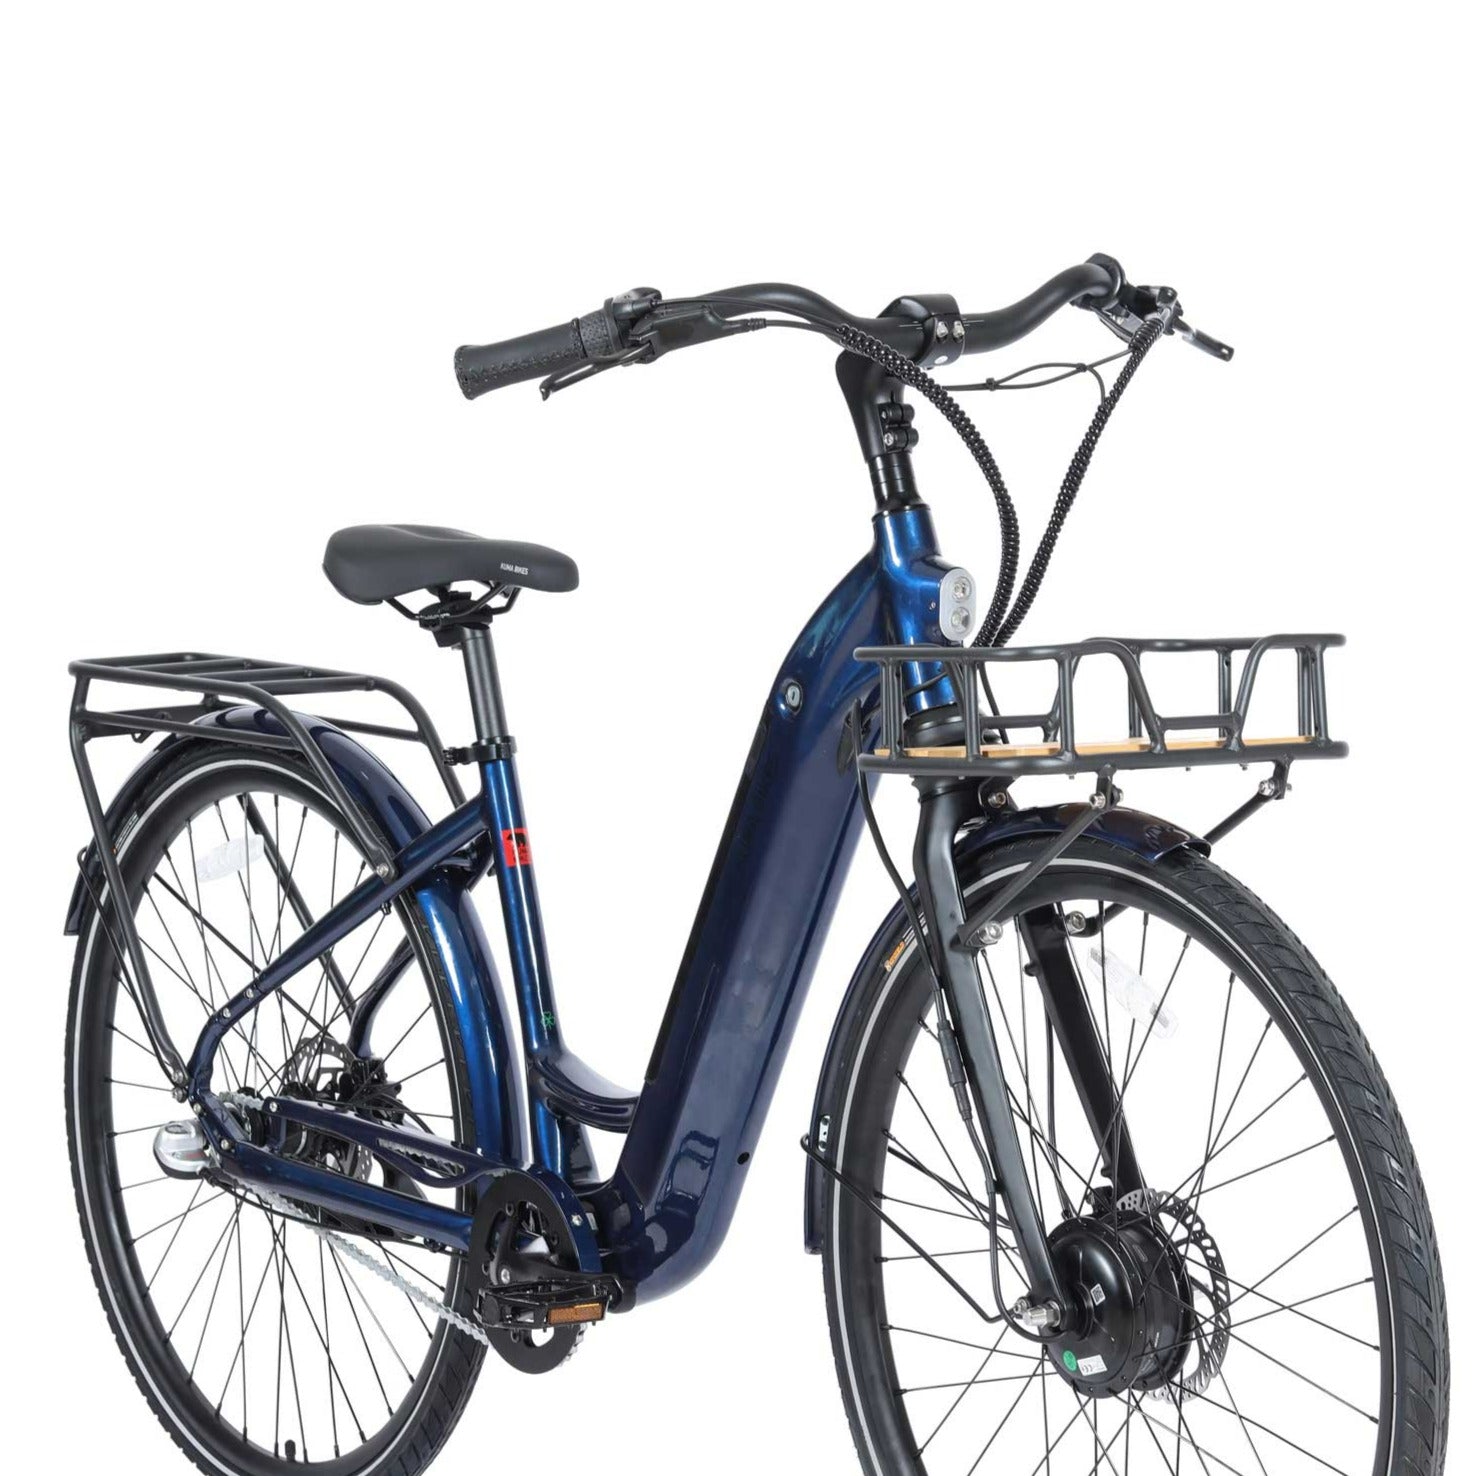 A product image of the Kuma S2 electric bike showing the front and right side of the bike against a white background. The frame colour is Navy Metallic.